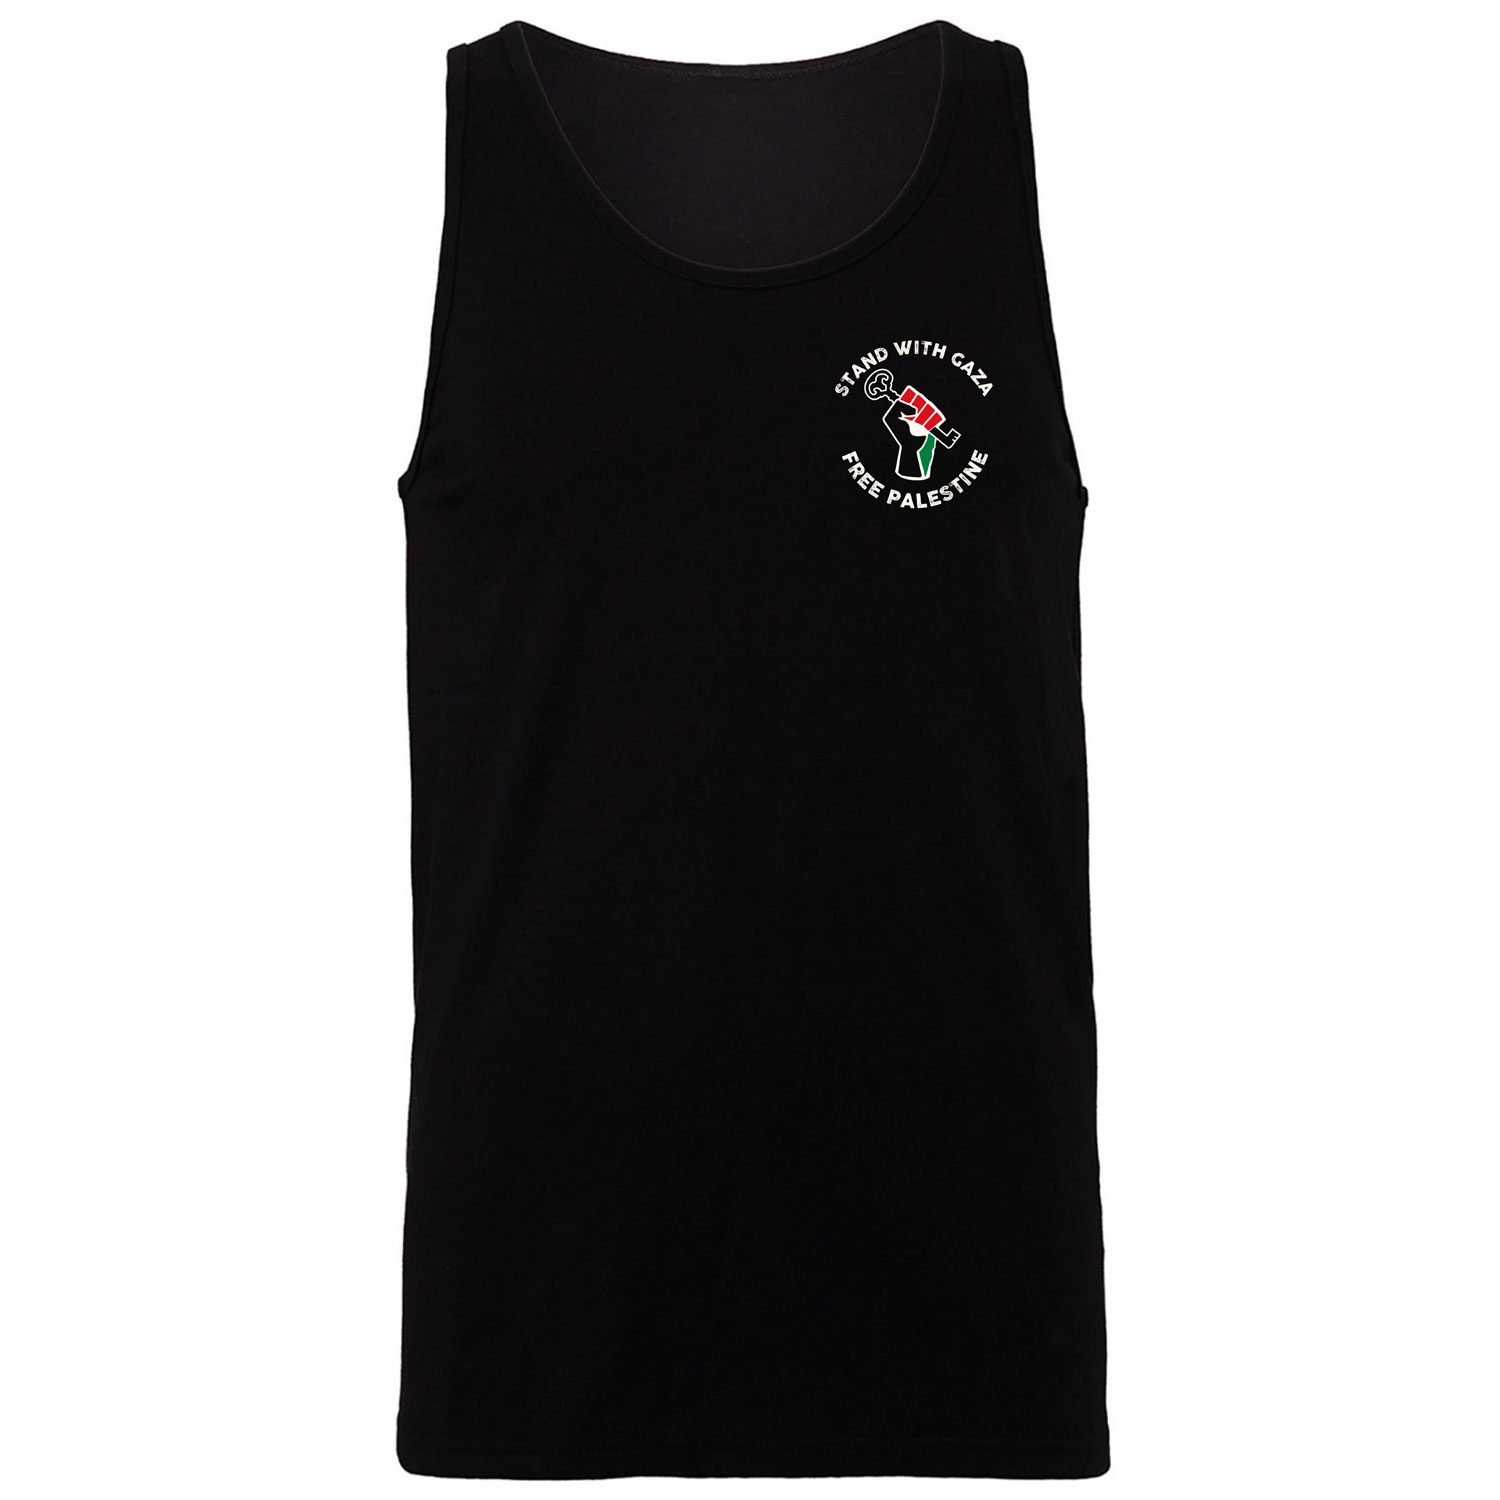 Stand with Gaza Tank Top